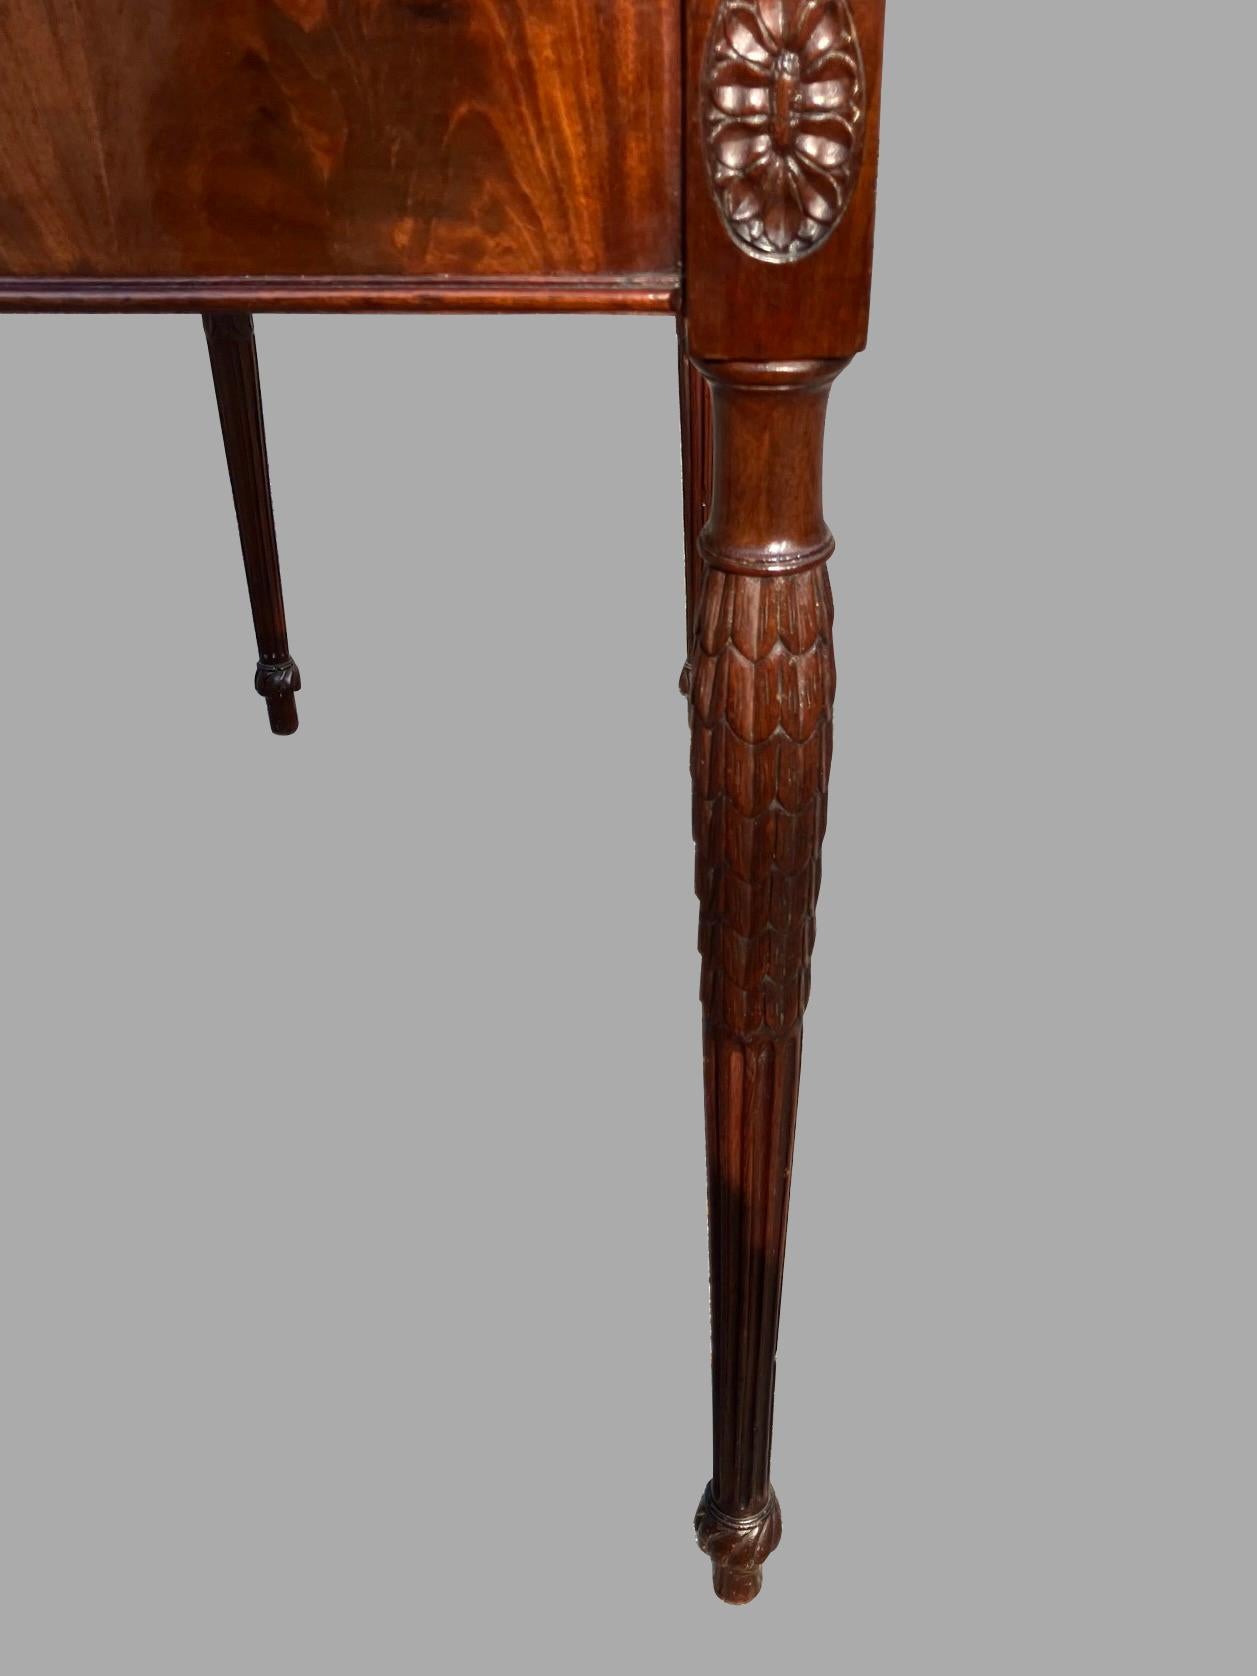 English Sheraton Mahogany Flip Top Games Table with Gilt-Tooled Leather Top  For Sale 2